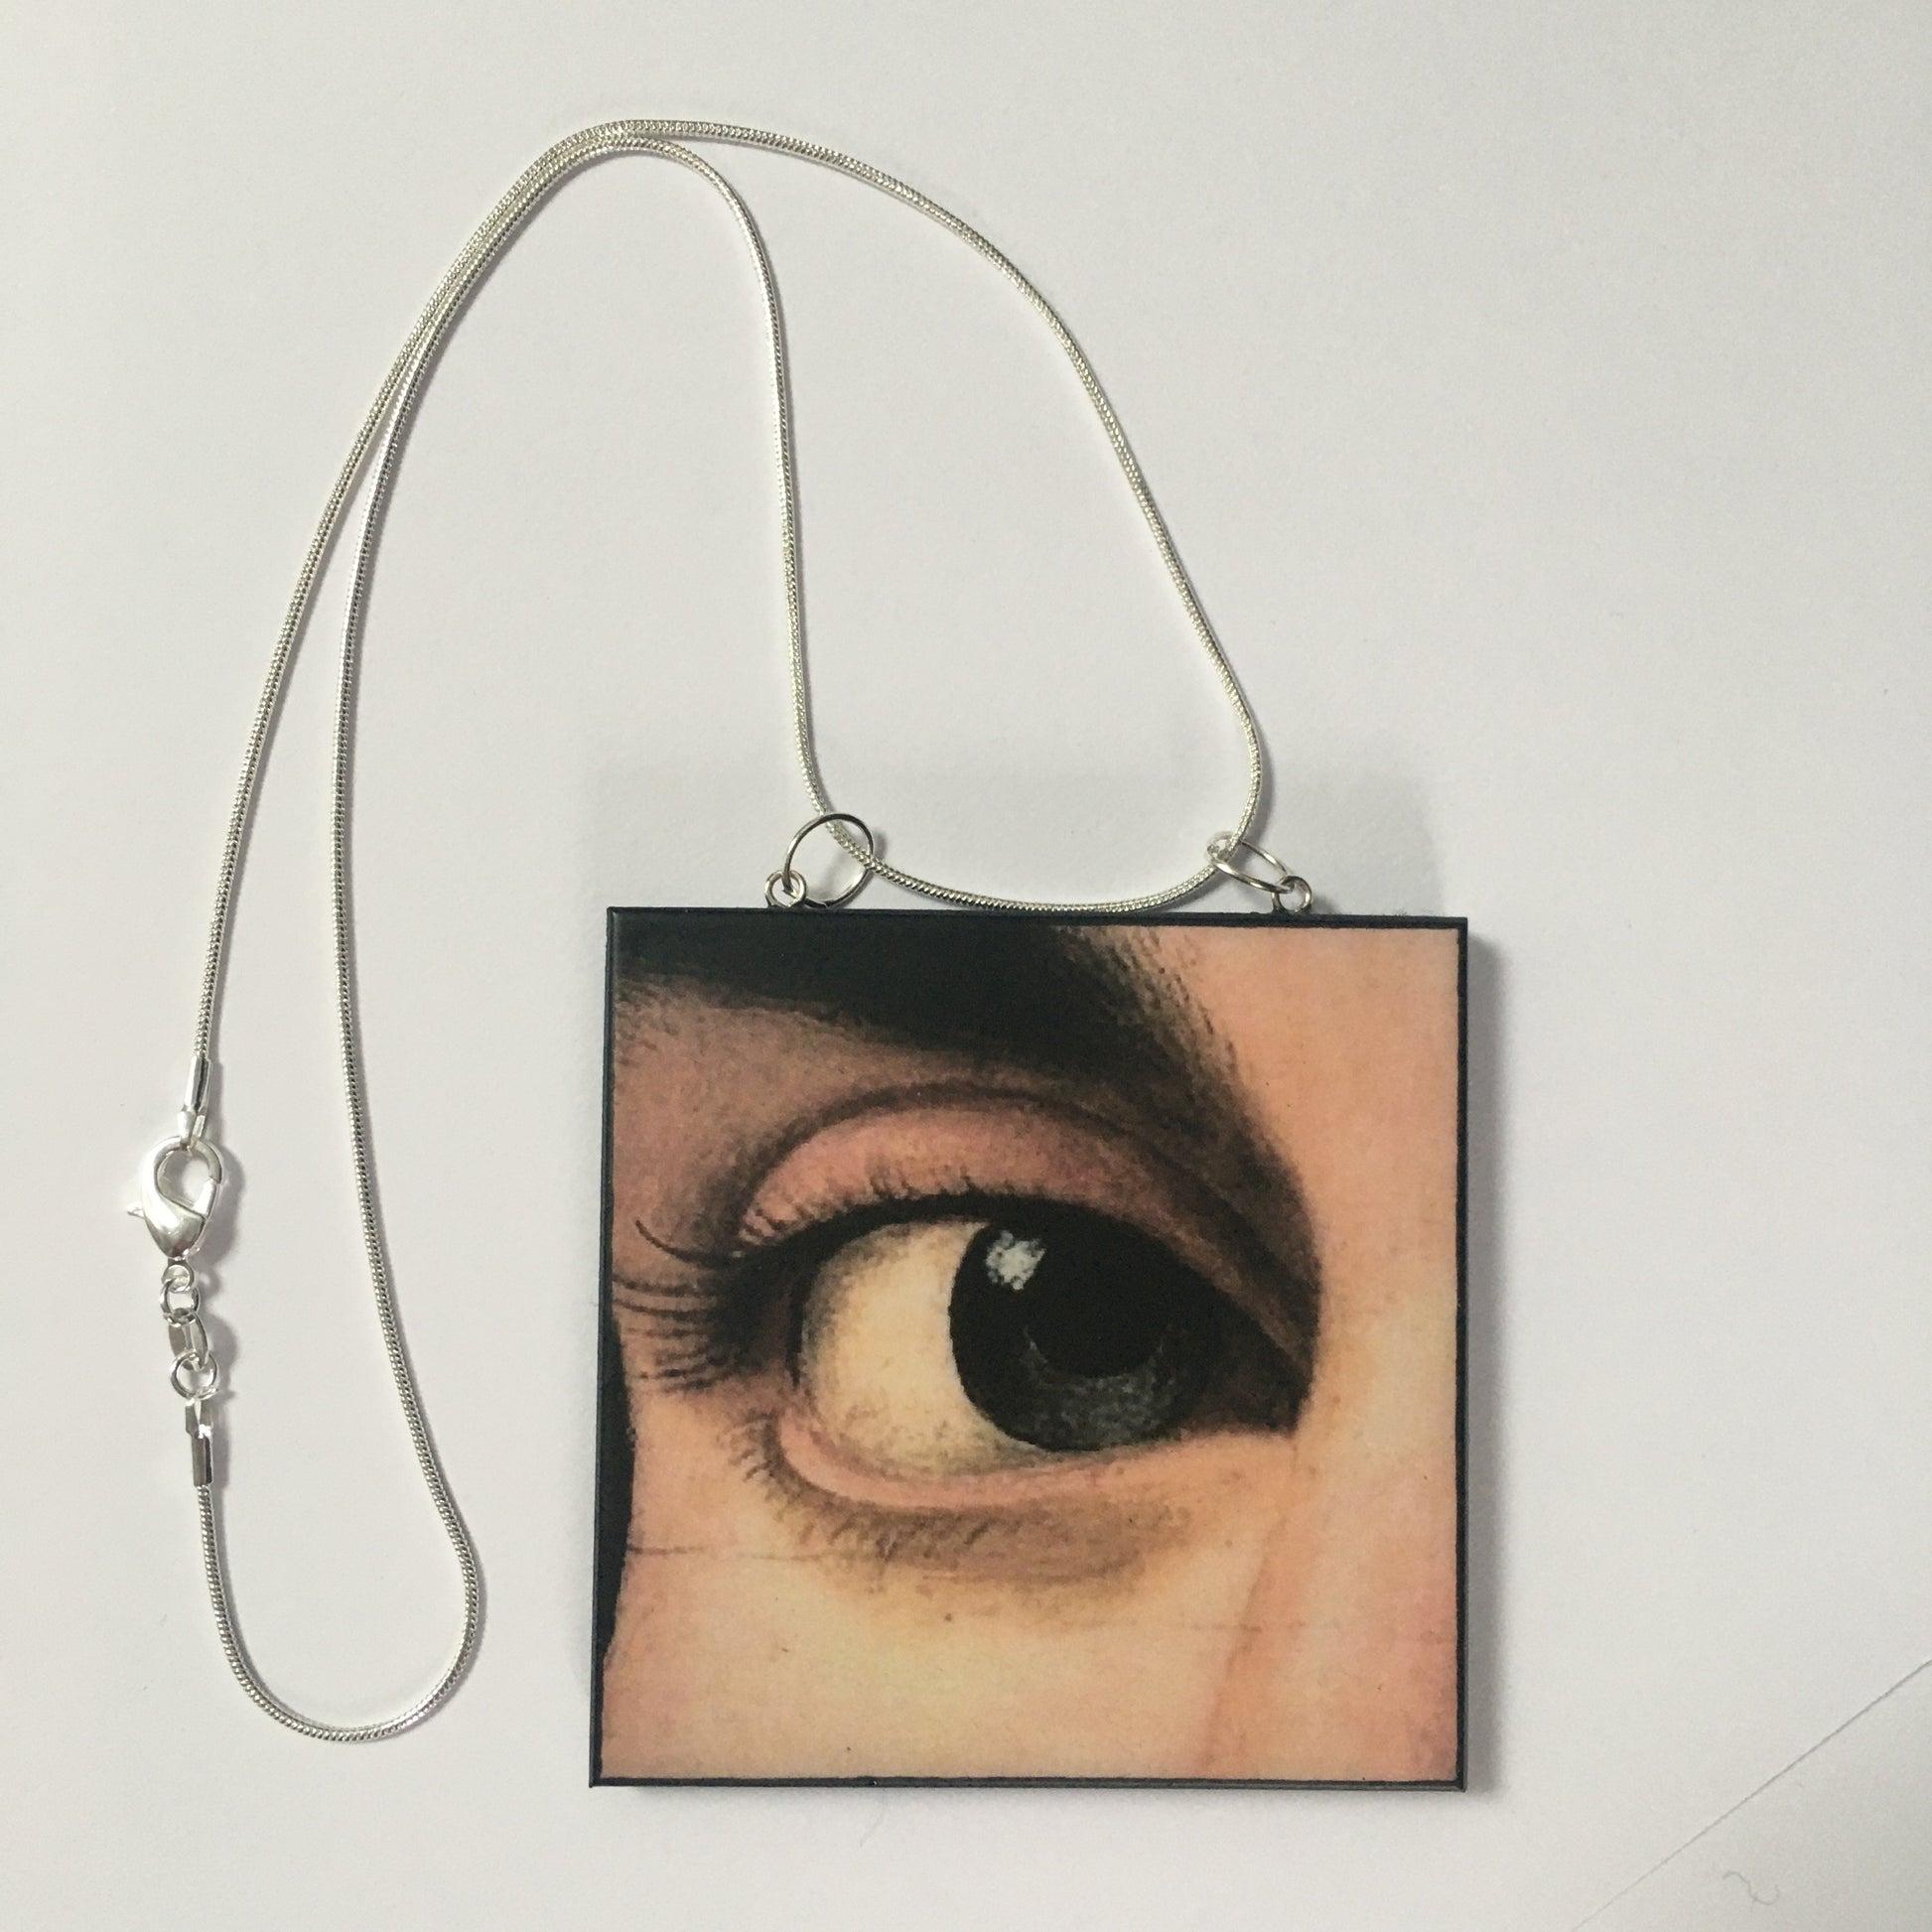 Sustainable wood pendant with an eye detail taken from a Renaissance art painting by Antonello da Messina. Handmade by Obljewellery